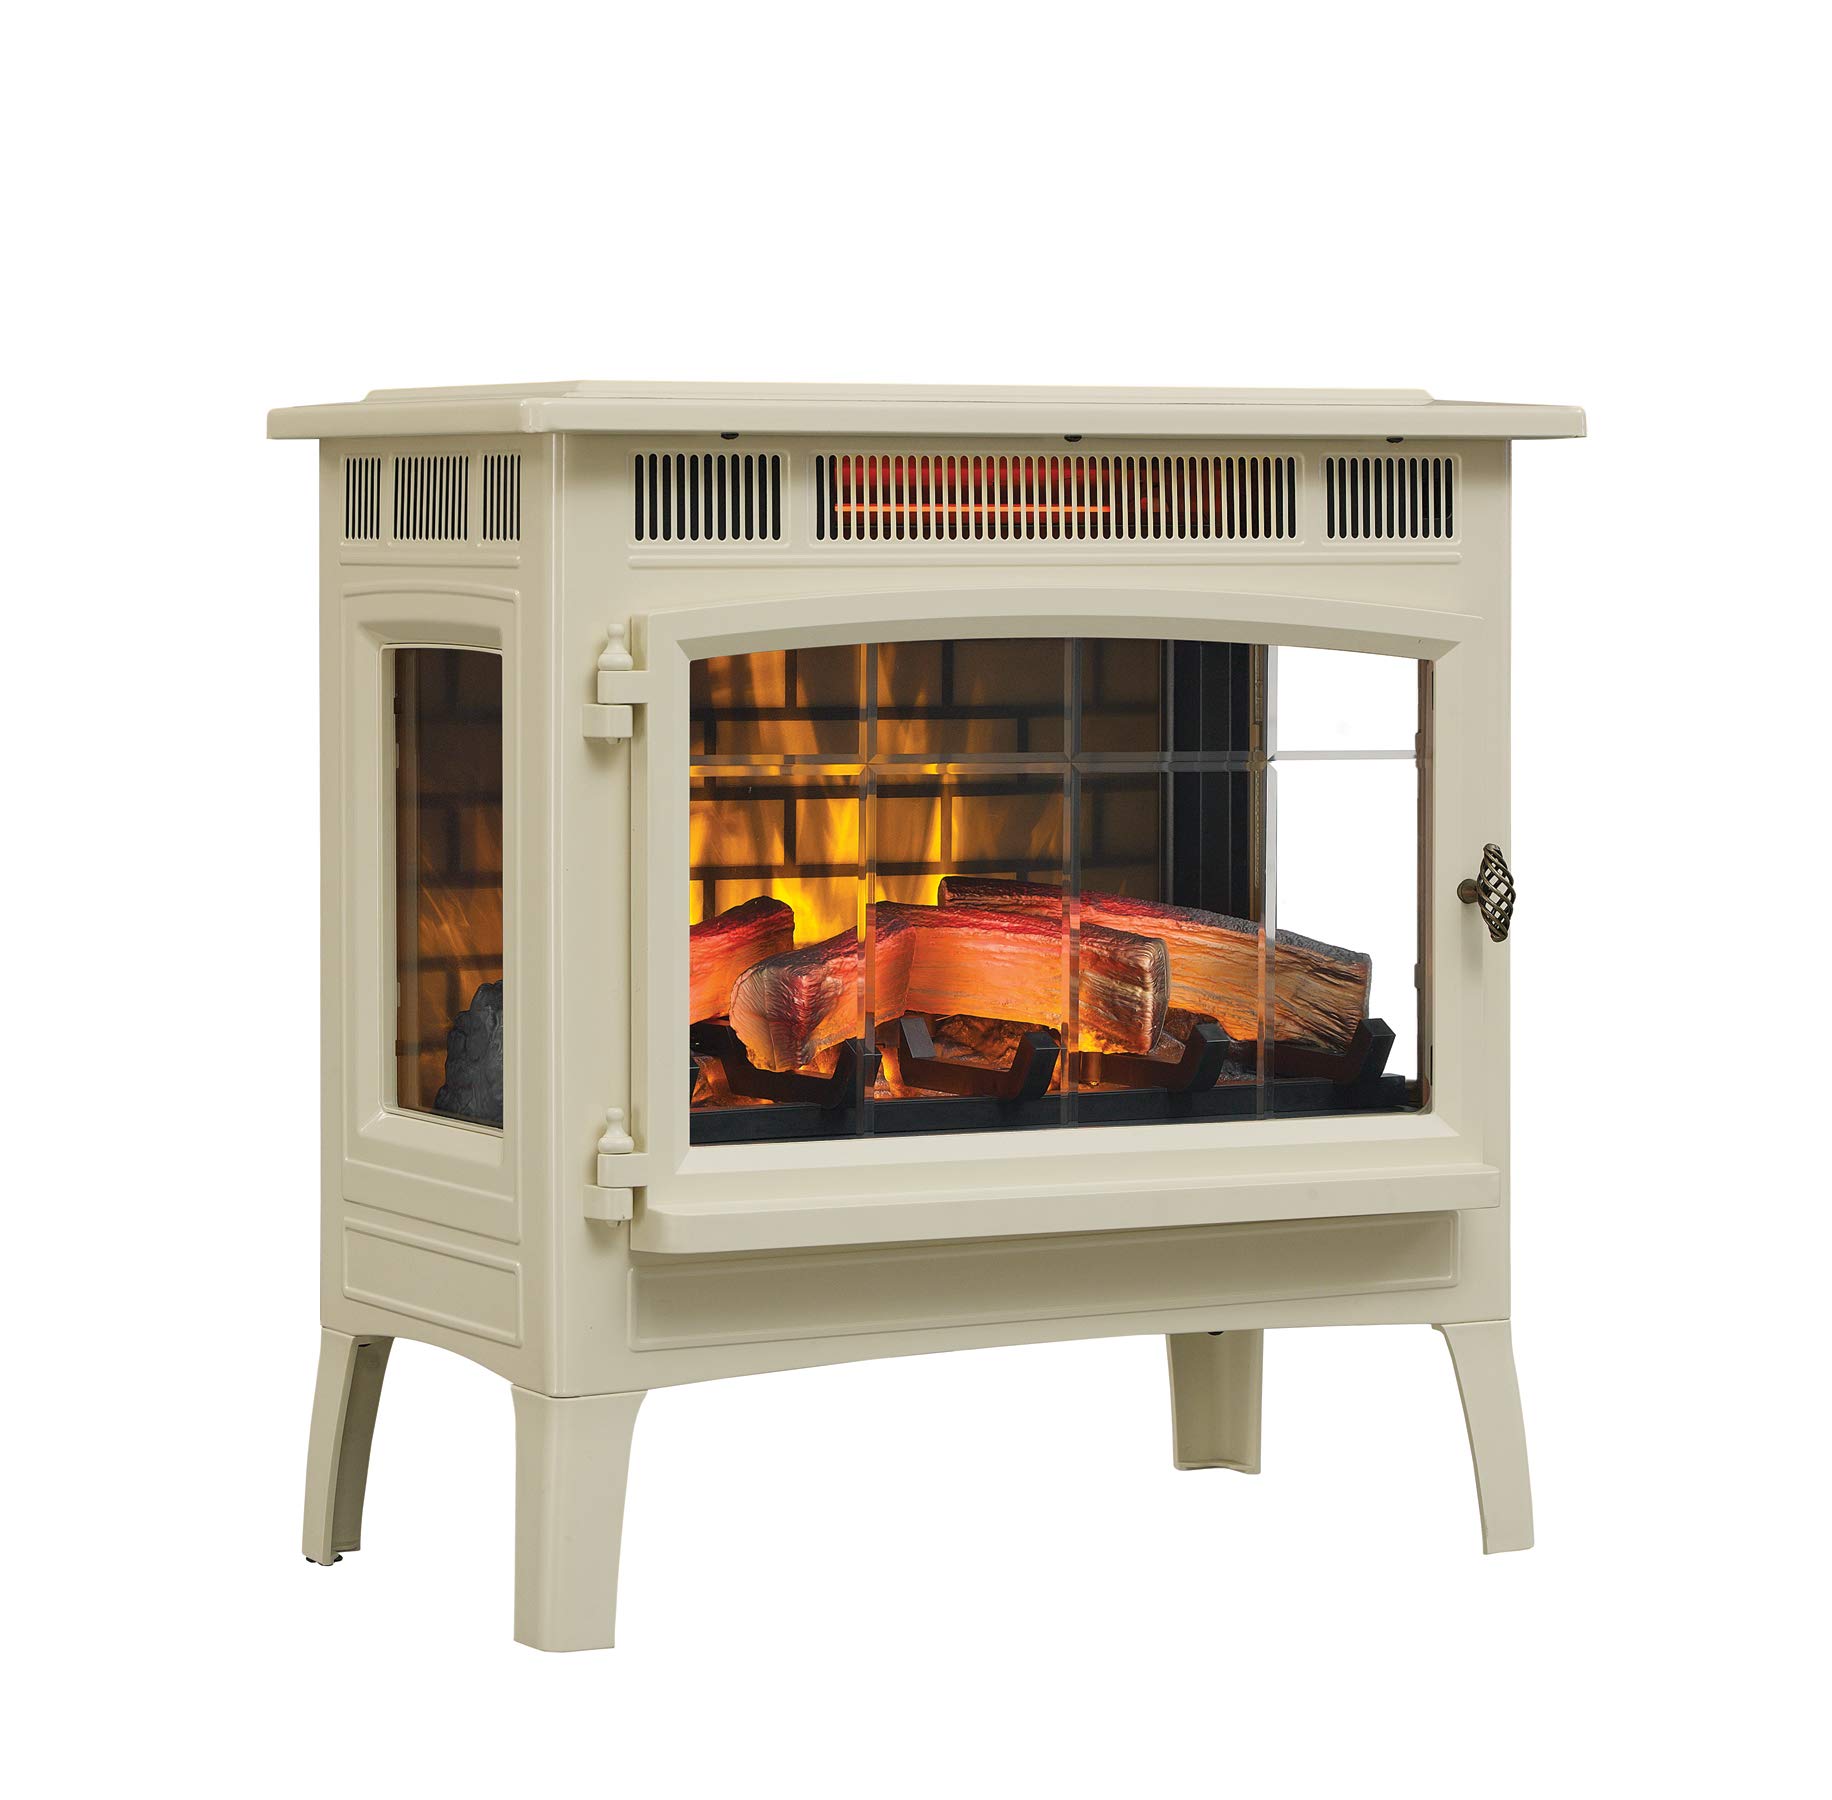 Duraflame Electric Infrared Quartz Fireplace Stove with 3D Flame Effect, cream